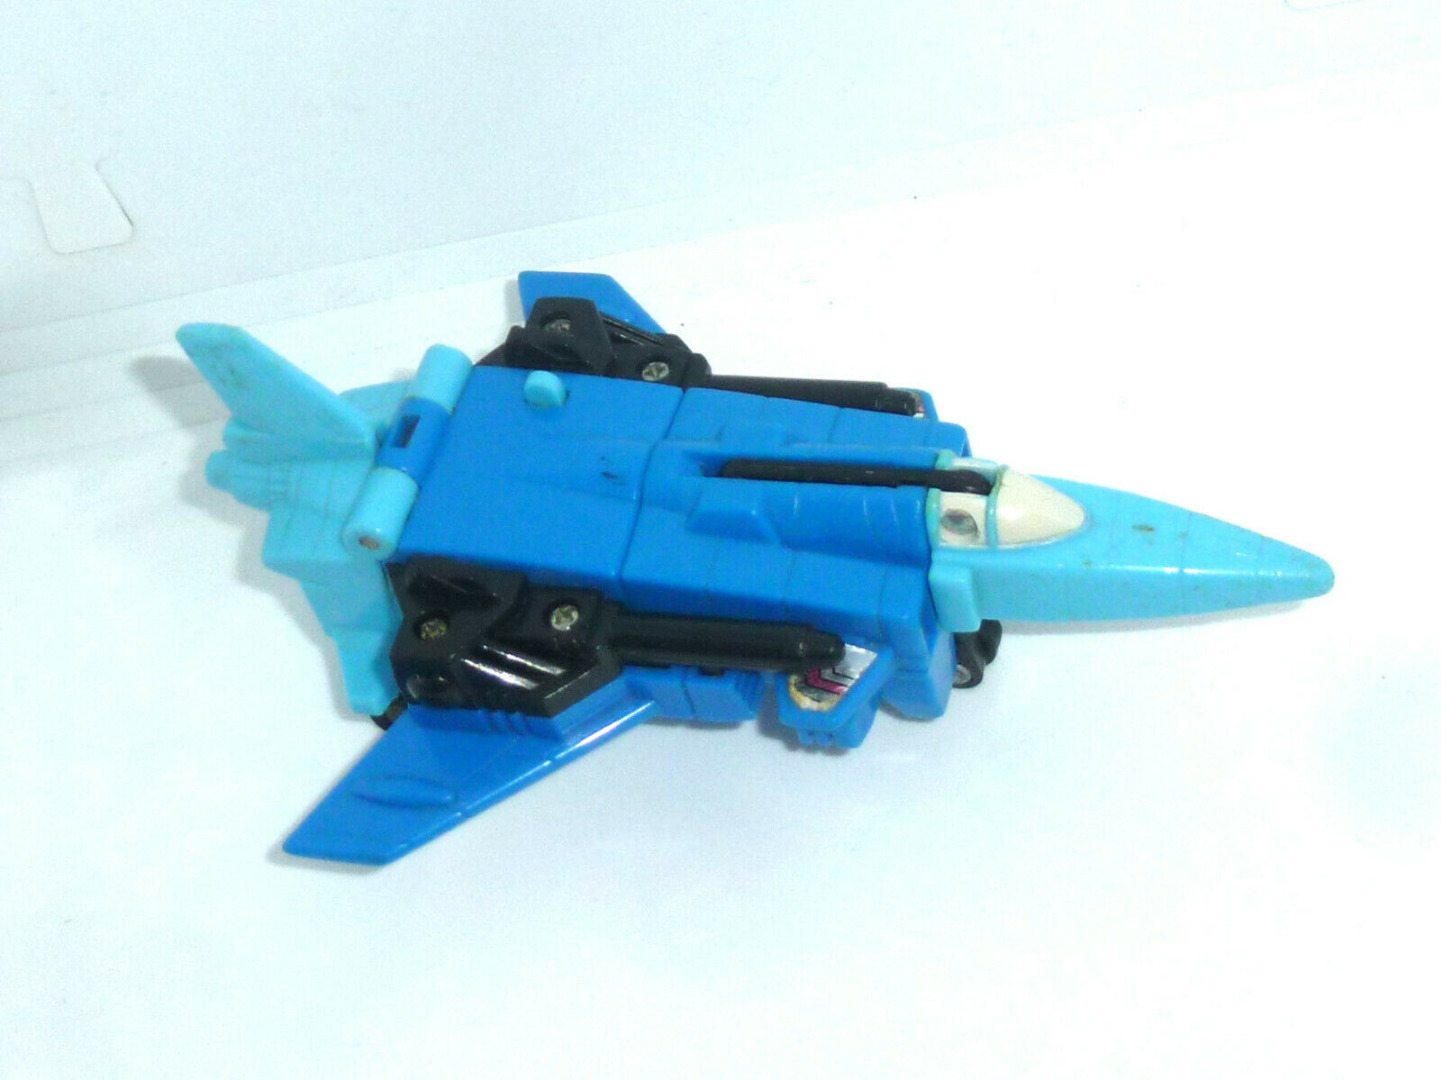 Transformers - Dogfight - Kampfjet - G1 Triggerbots and Triggercons 2